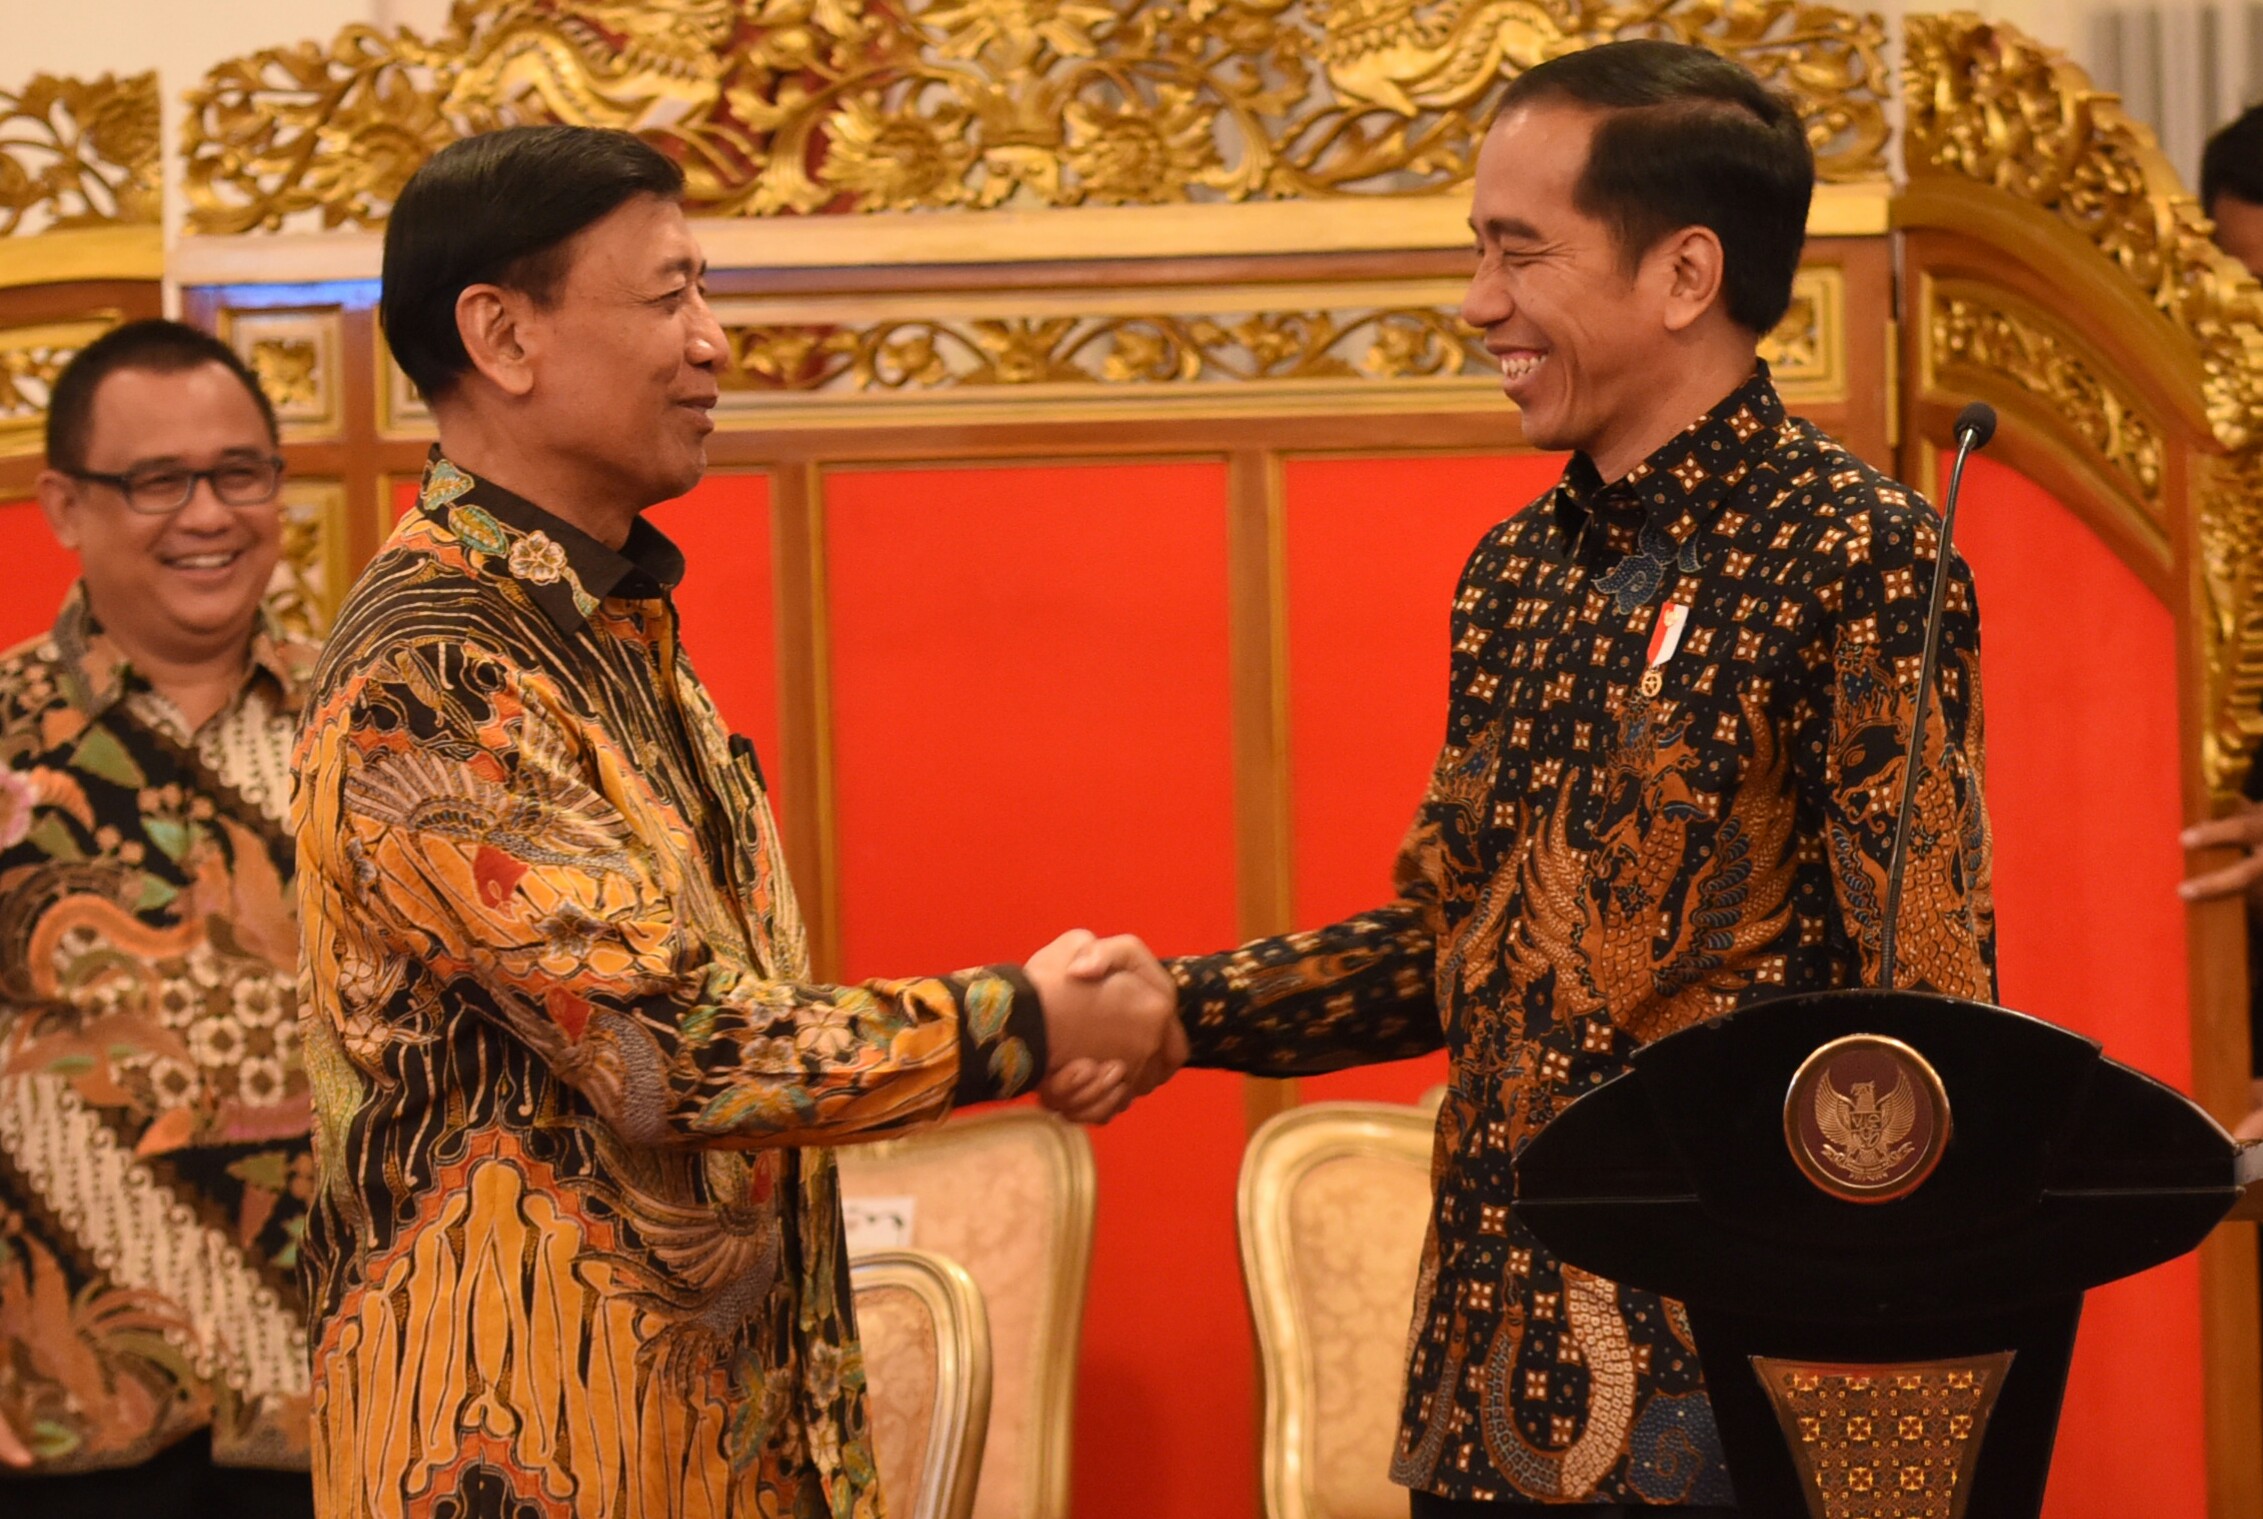 President Jokowi says happy birthday to Coordinating Minister for Political, Legal, and Security Affairs Wiranto before leading a plenary cabinet meeting at the State Palace, Jakarta (4/4). (Photo by: Public Relations Division/Rahmat)